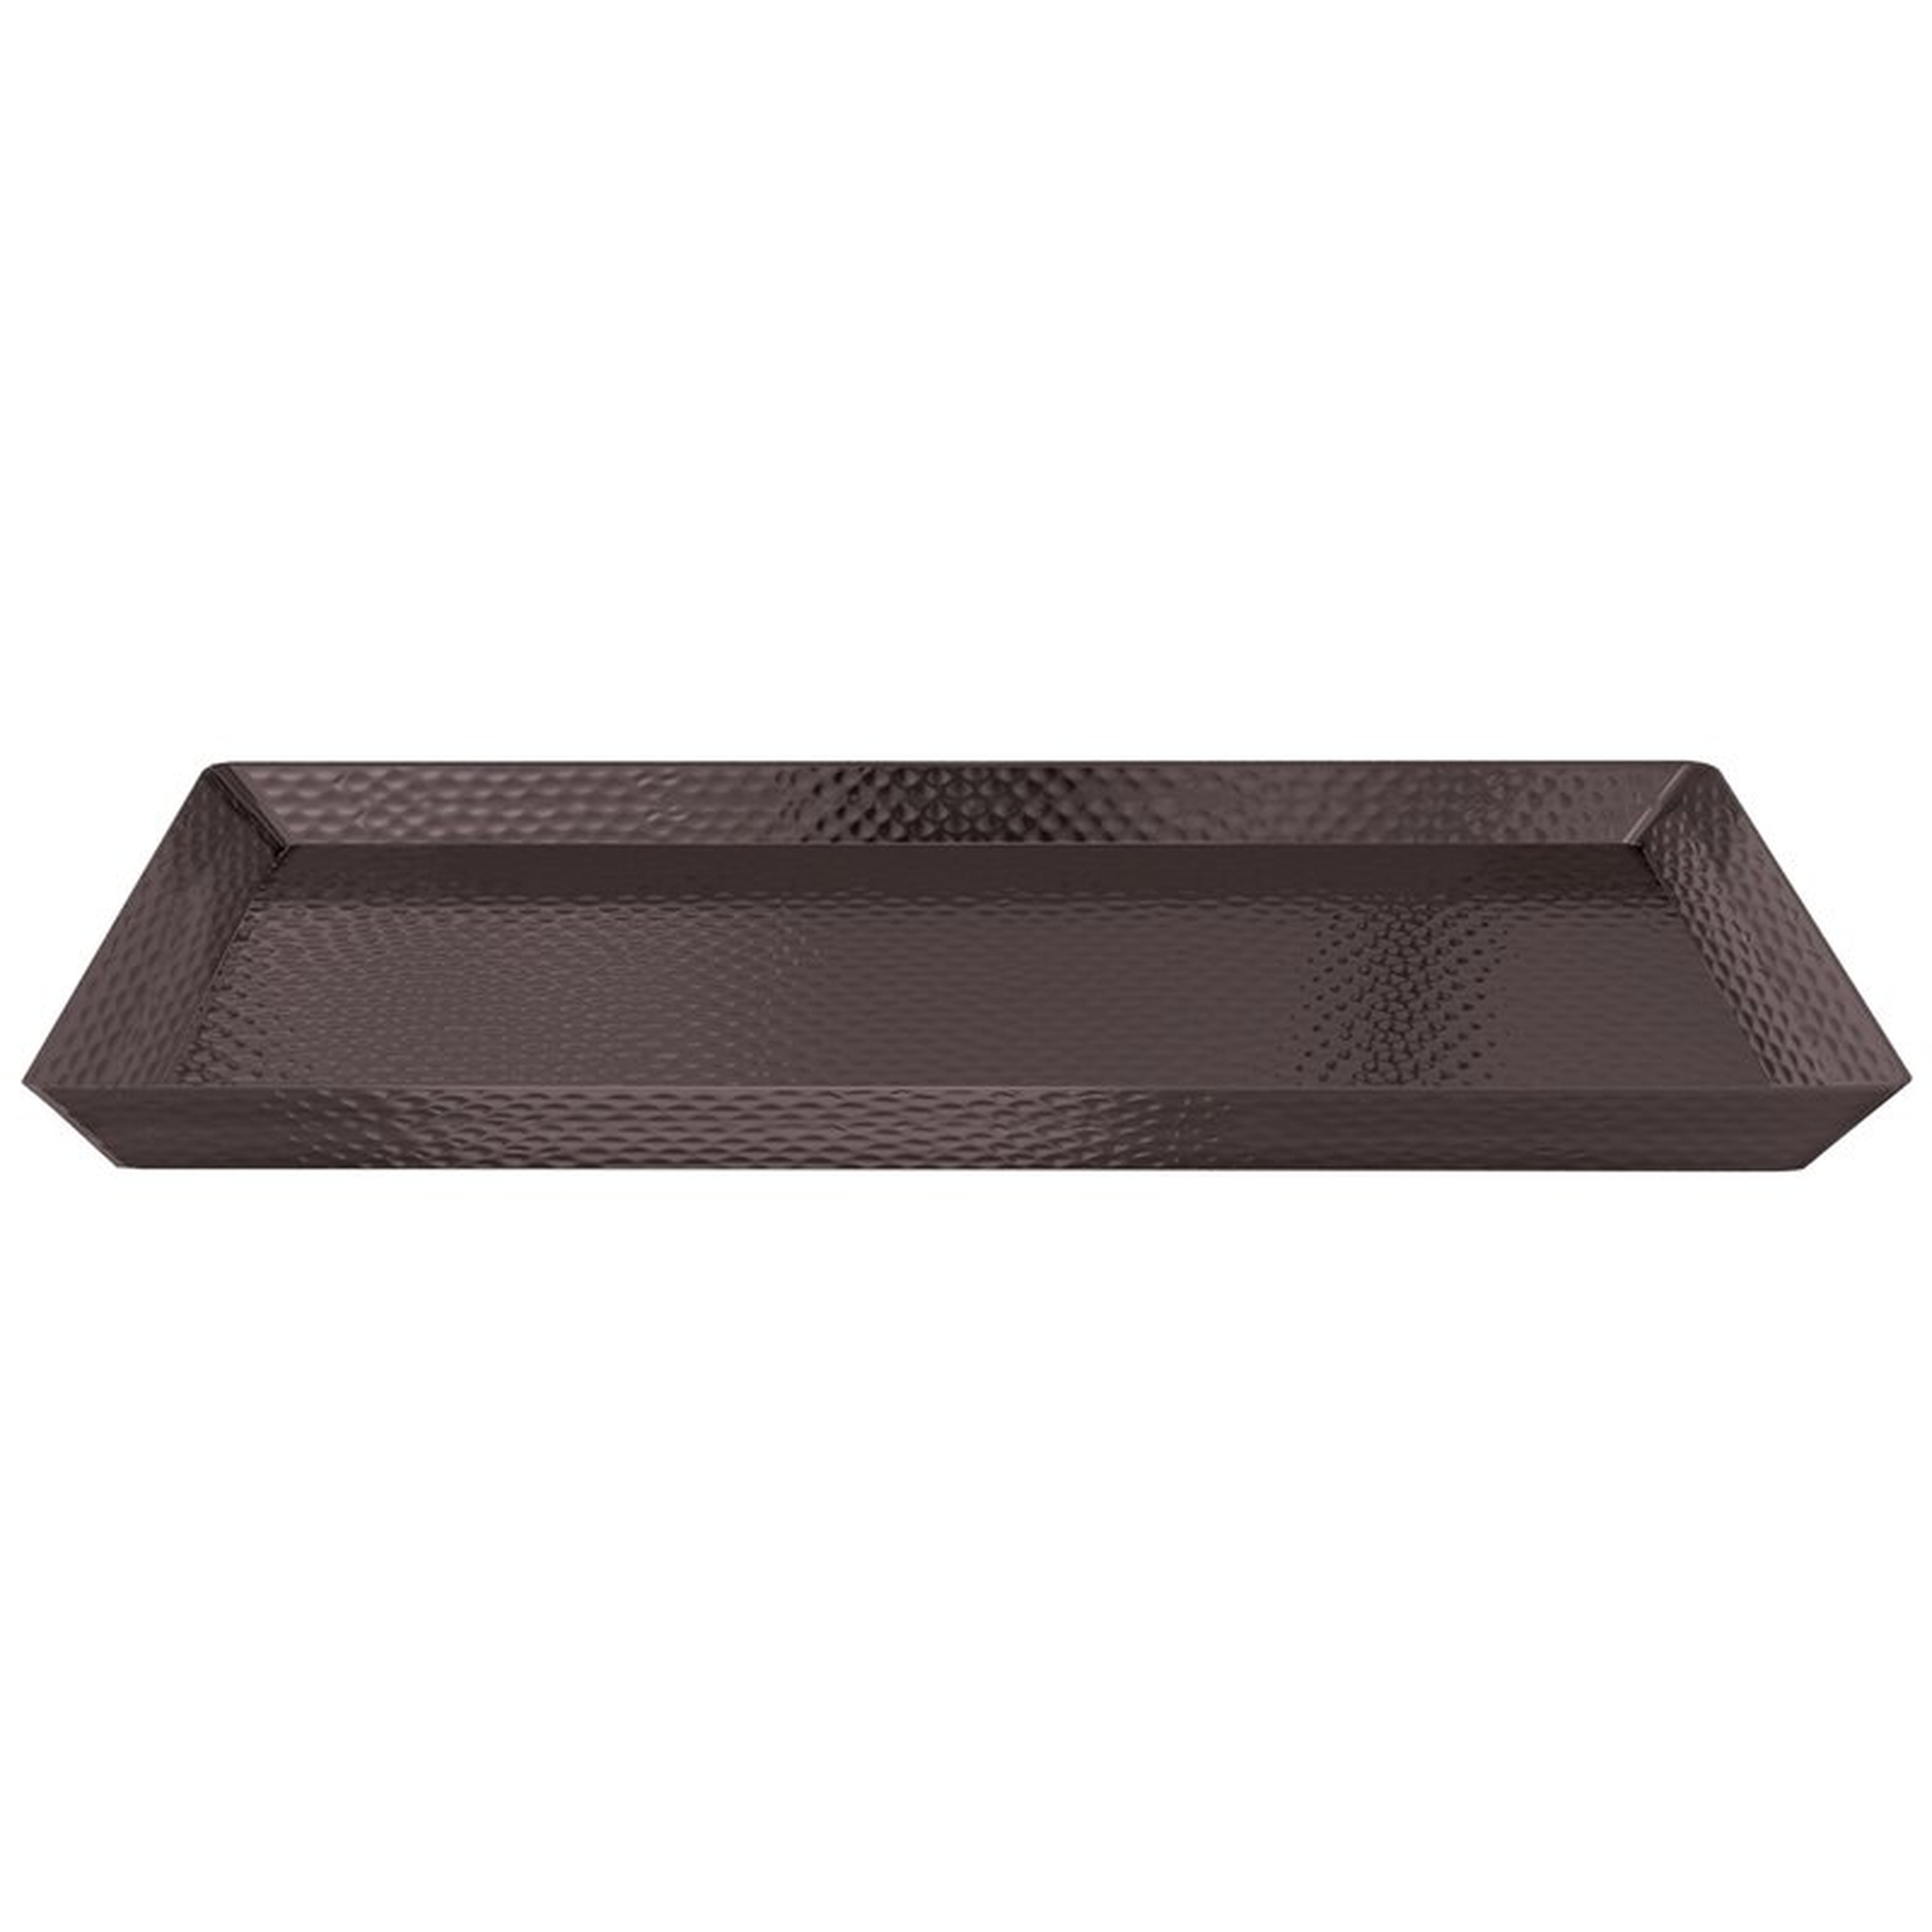 Creager Hammered Accent Serving Tray - Wayfair